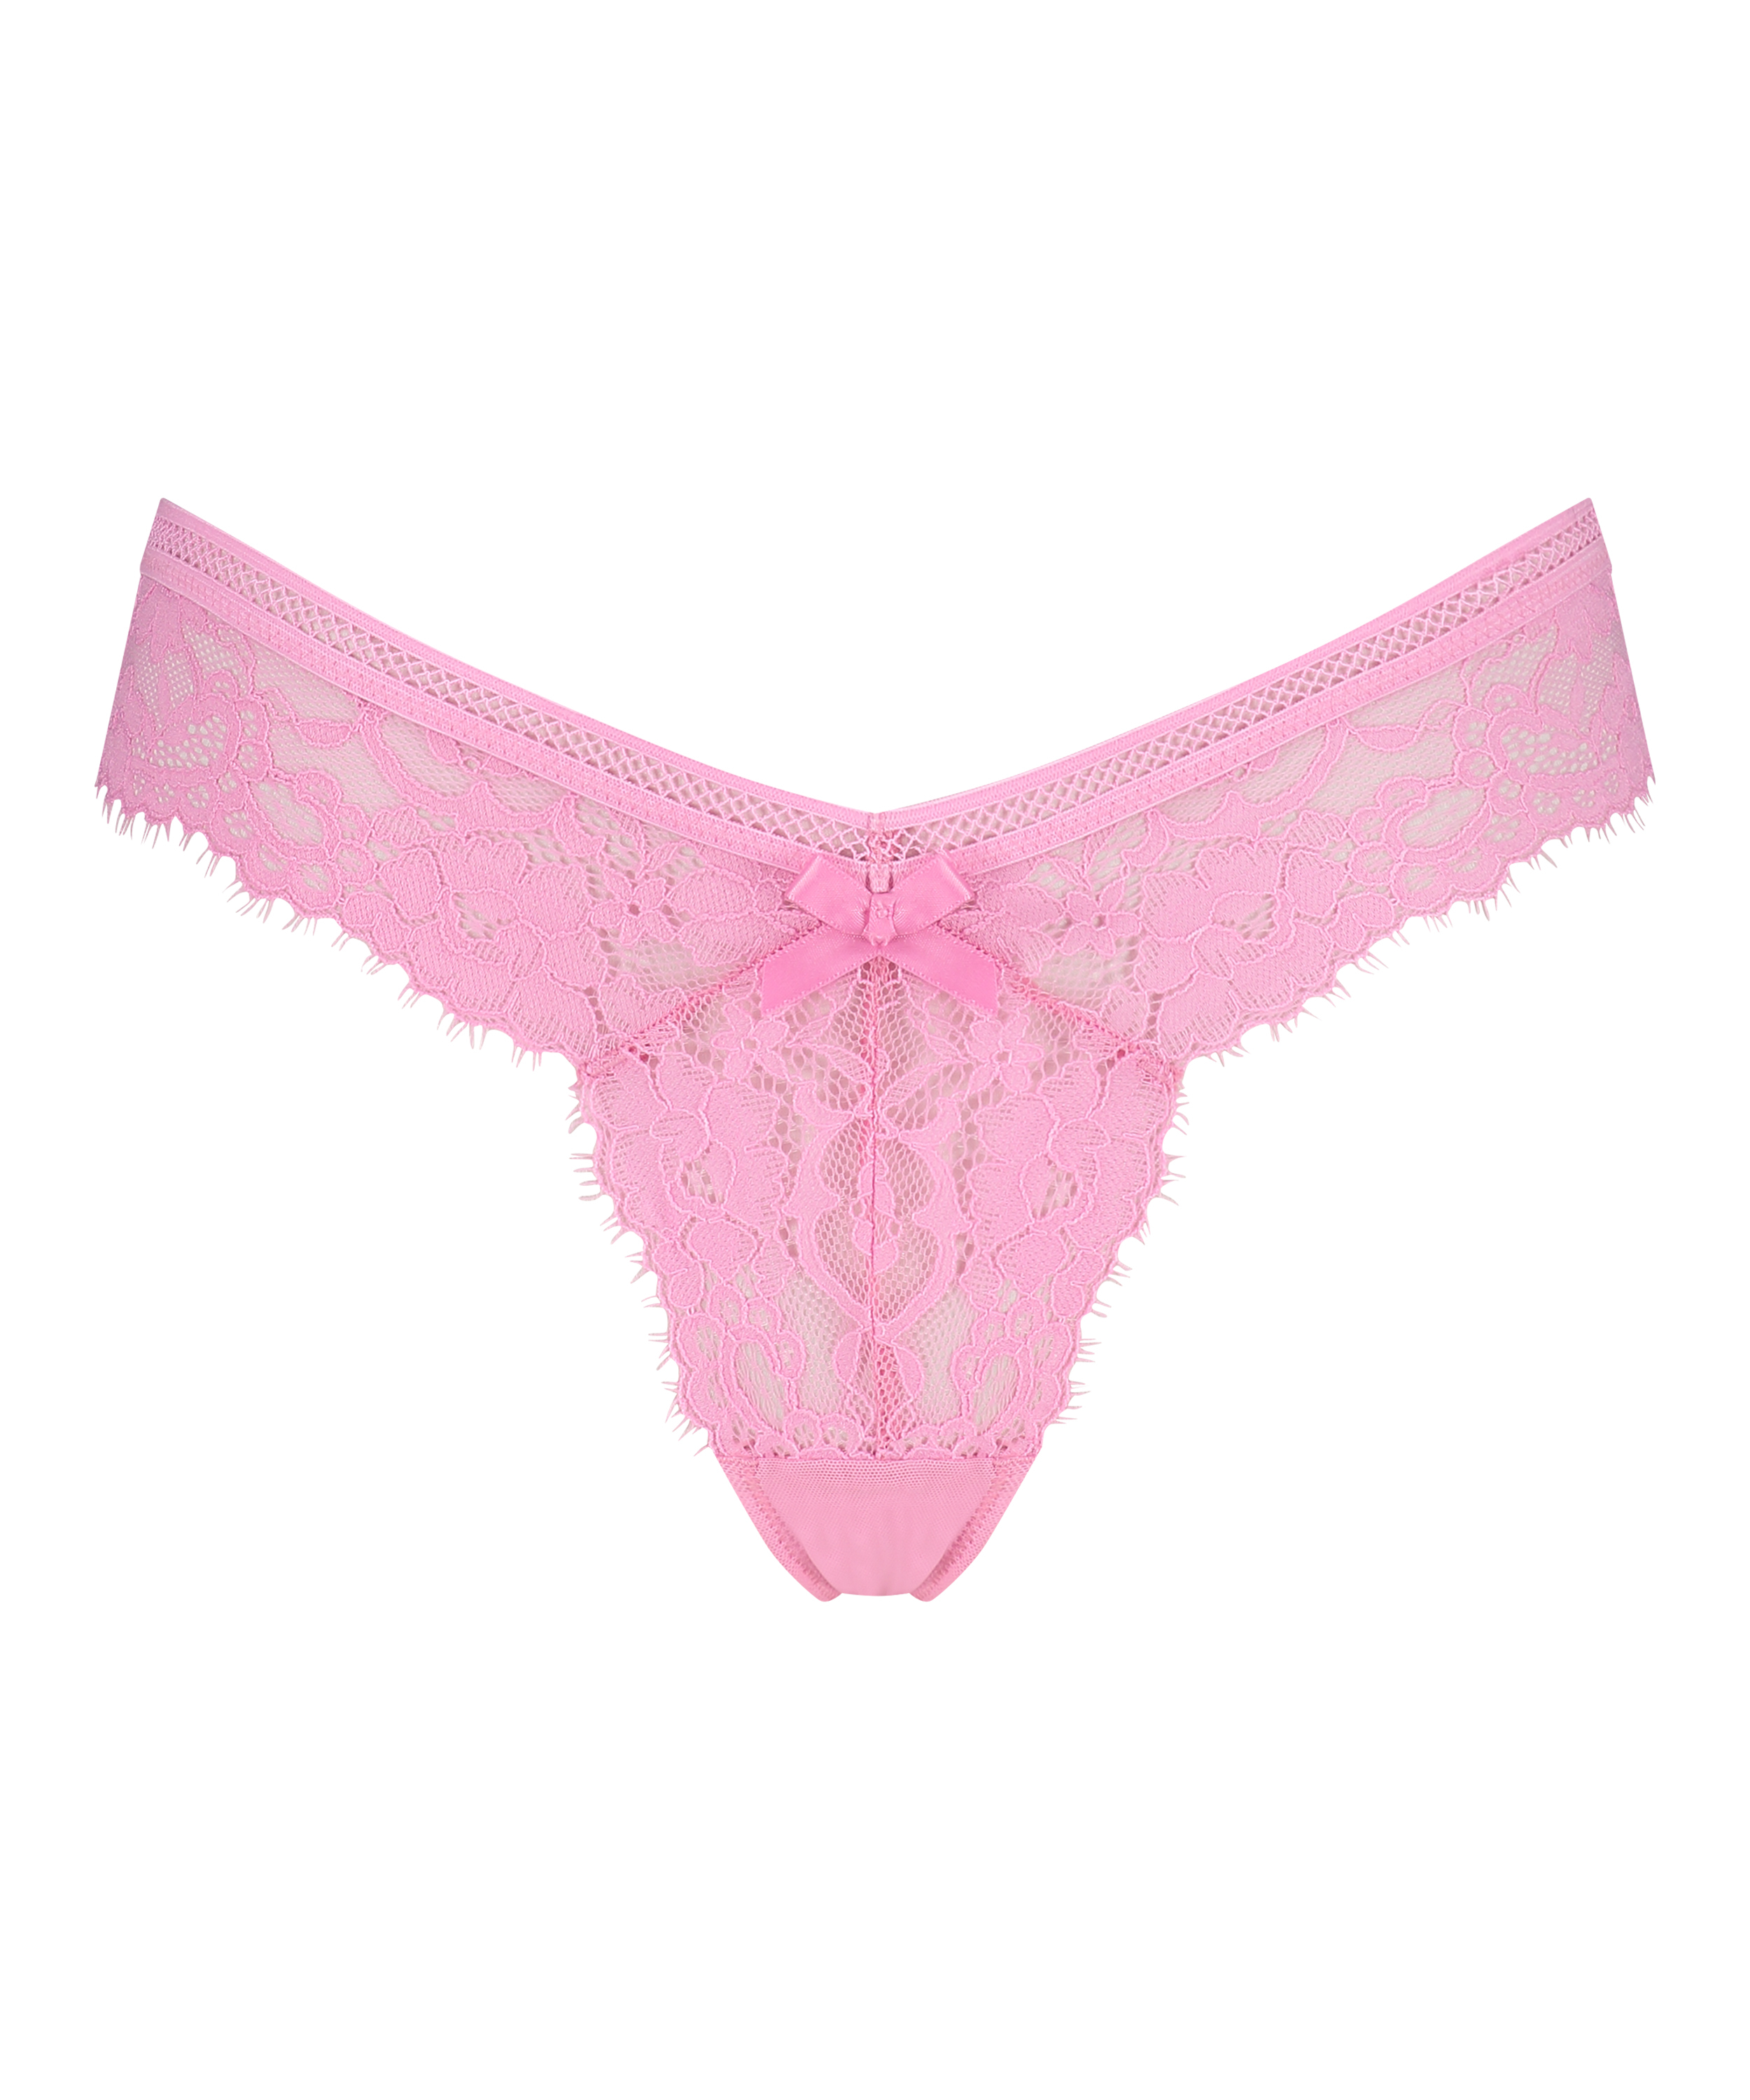 Gianni extra low rise thong, Pink, main